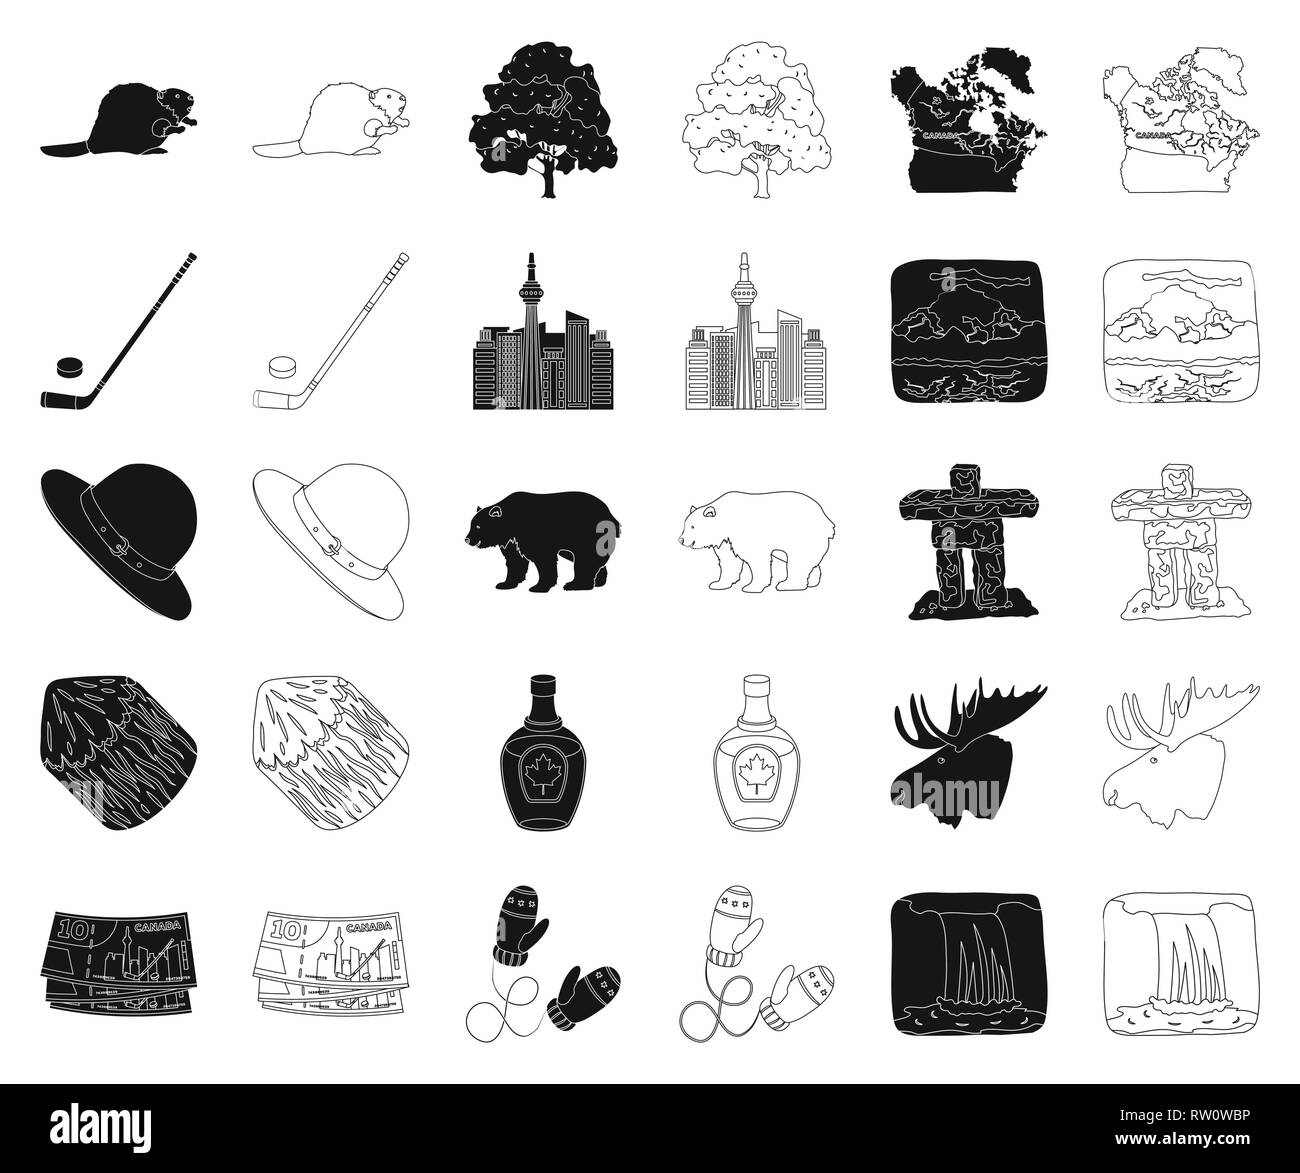 animal,attributes,bear,beaver,black,outline,bottle,building,canada,city,collection,country,culture,custom,deer,design,dollar,elk,features,fir,glove,handgrip,hat,horns,icon,illustration,isolated,landmark,log,maple,mountain,nation,nationality,nature,ocean,puck,ranger,set,sign,sky,snow,stick,stone,symbol,syrup,territory,travel,tree,vector,waterfall,wild Vector Vectors , Stock Vector